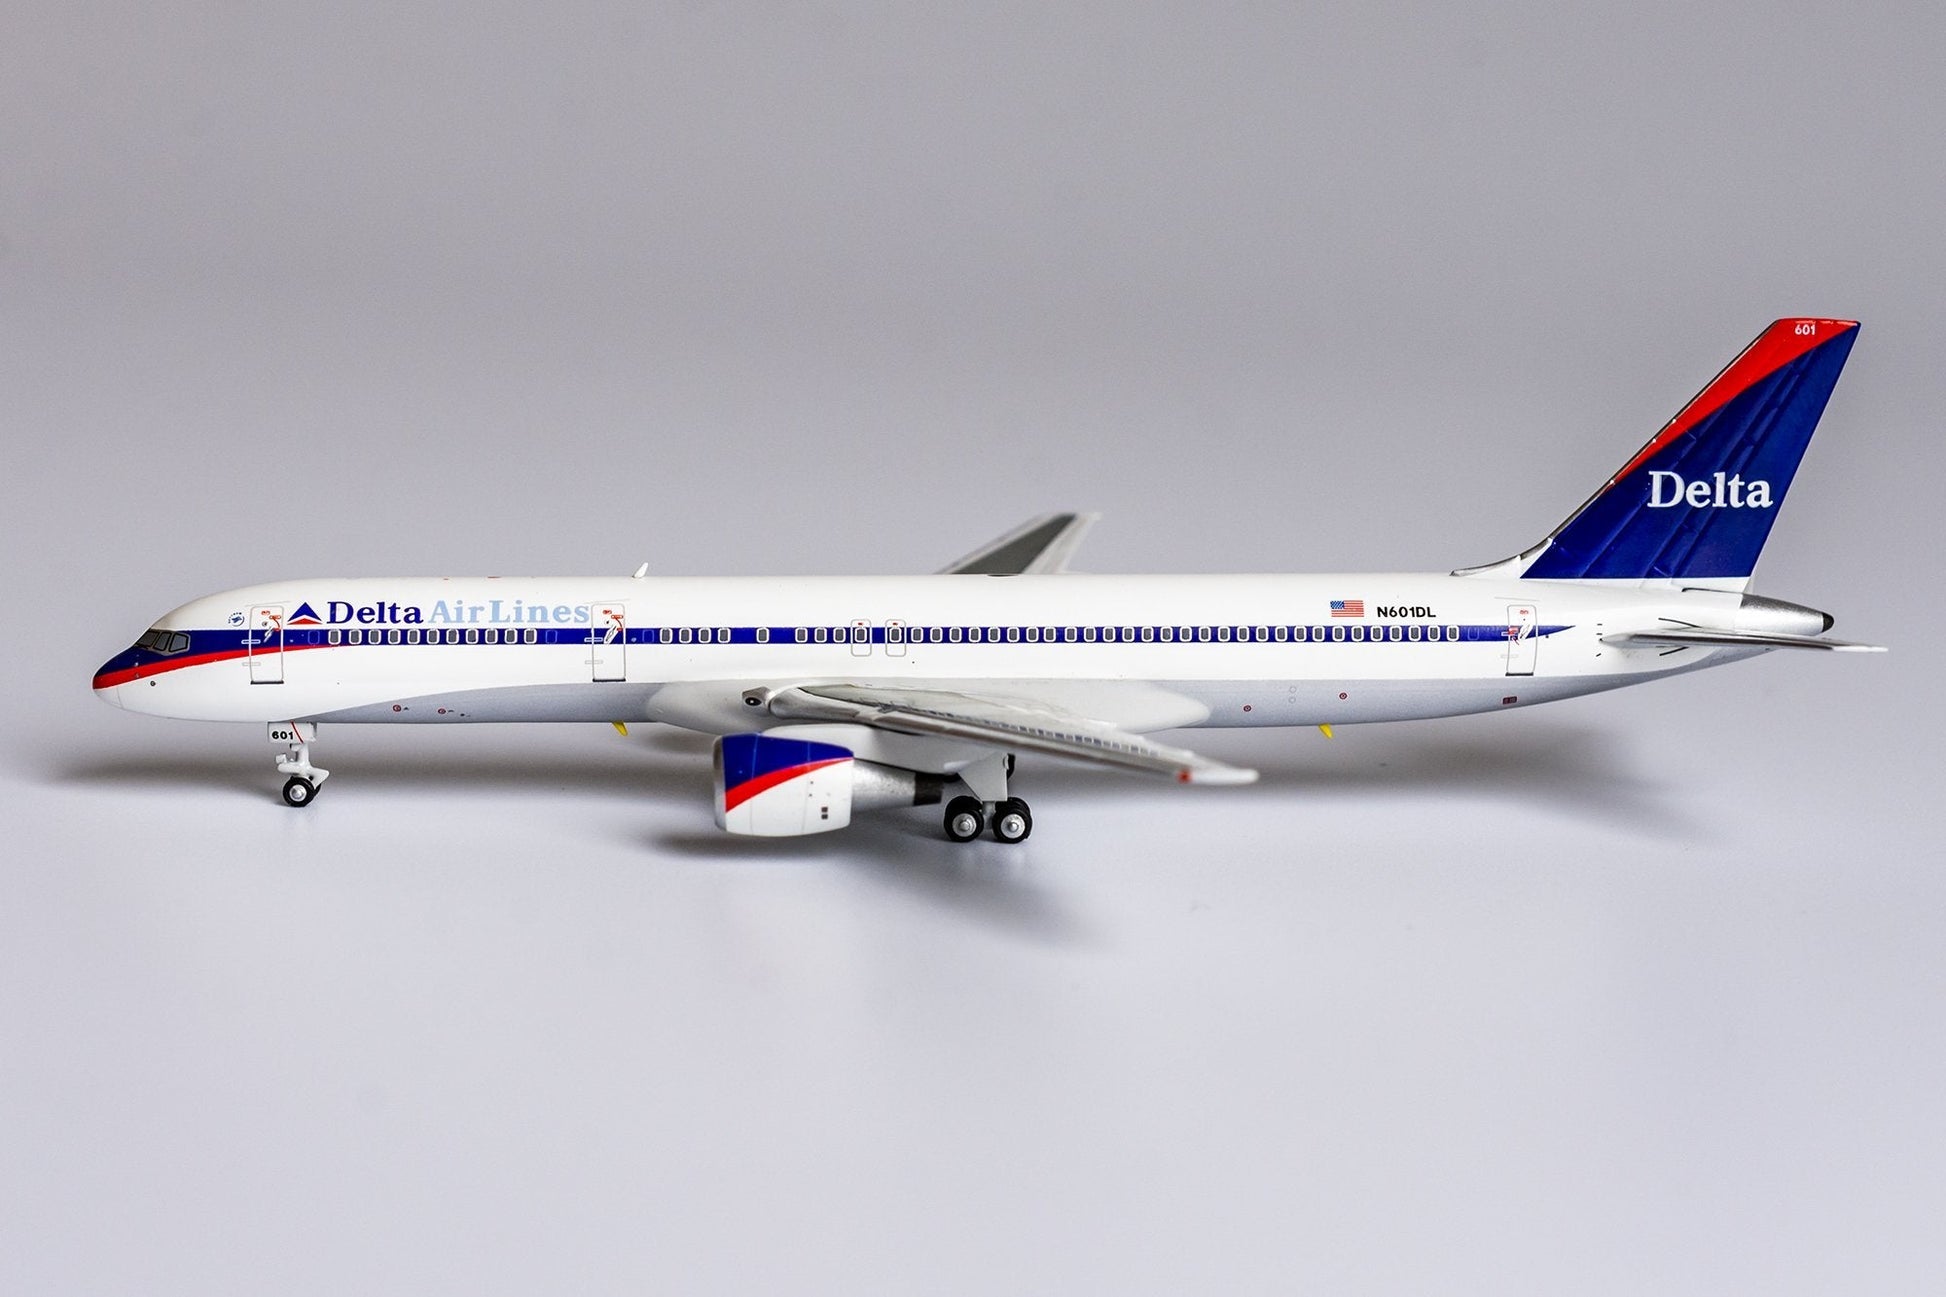 *PREORDER* 1/400 Delta Airlines B 757-200 NG Models 53170 - Midwest Model Store